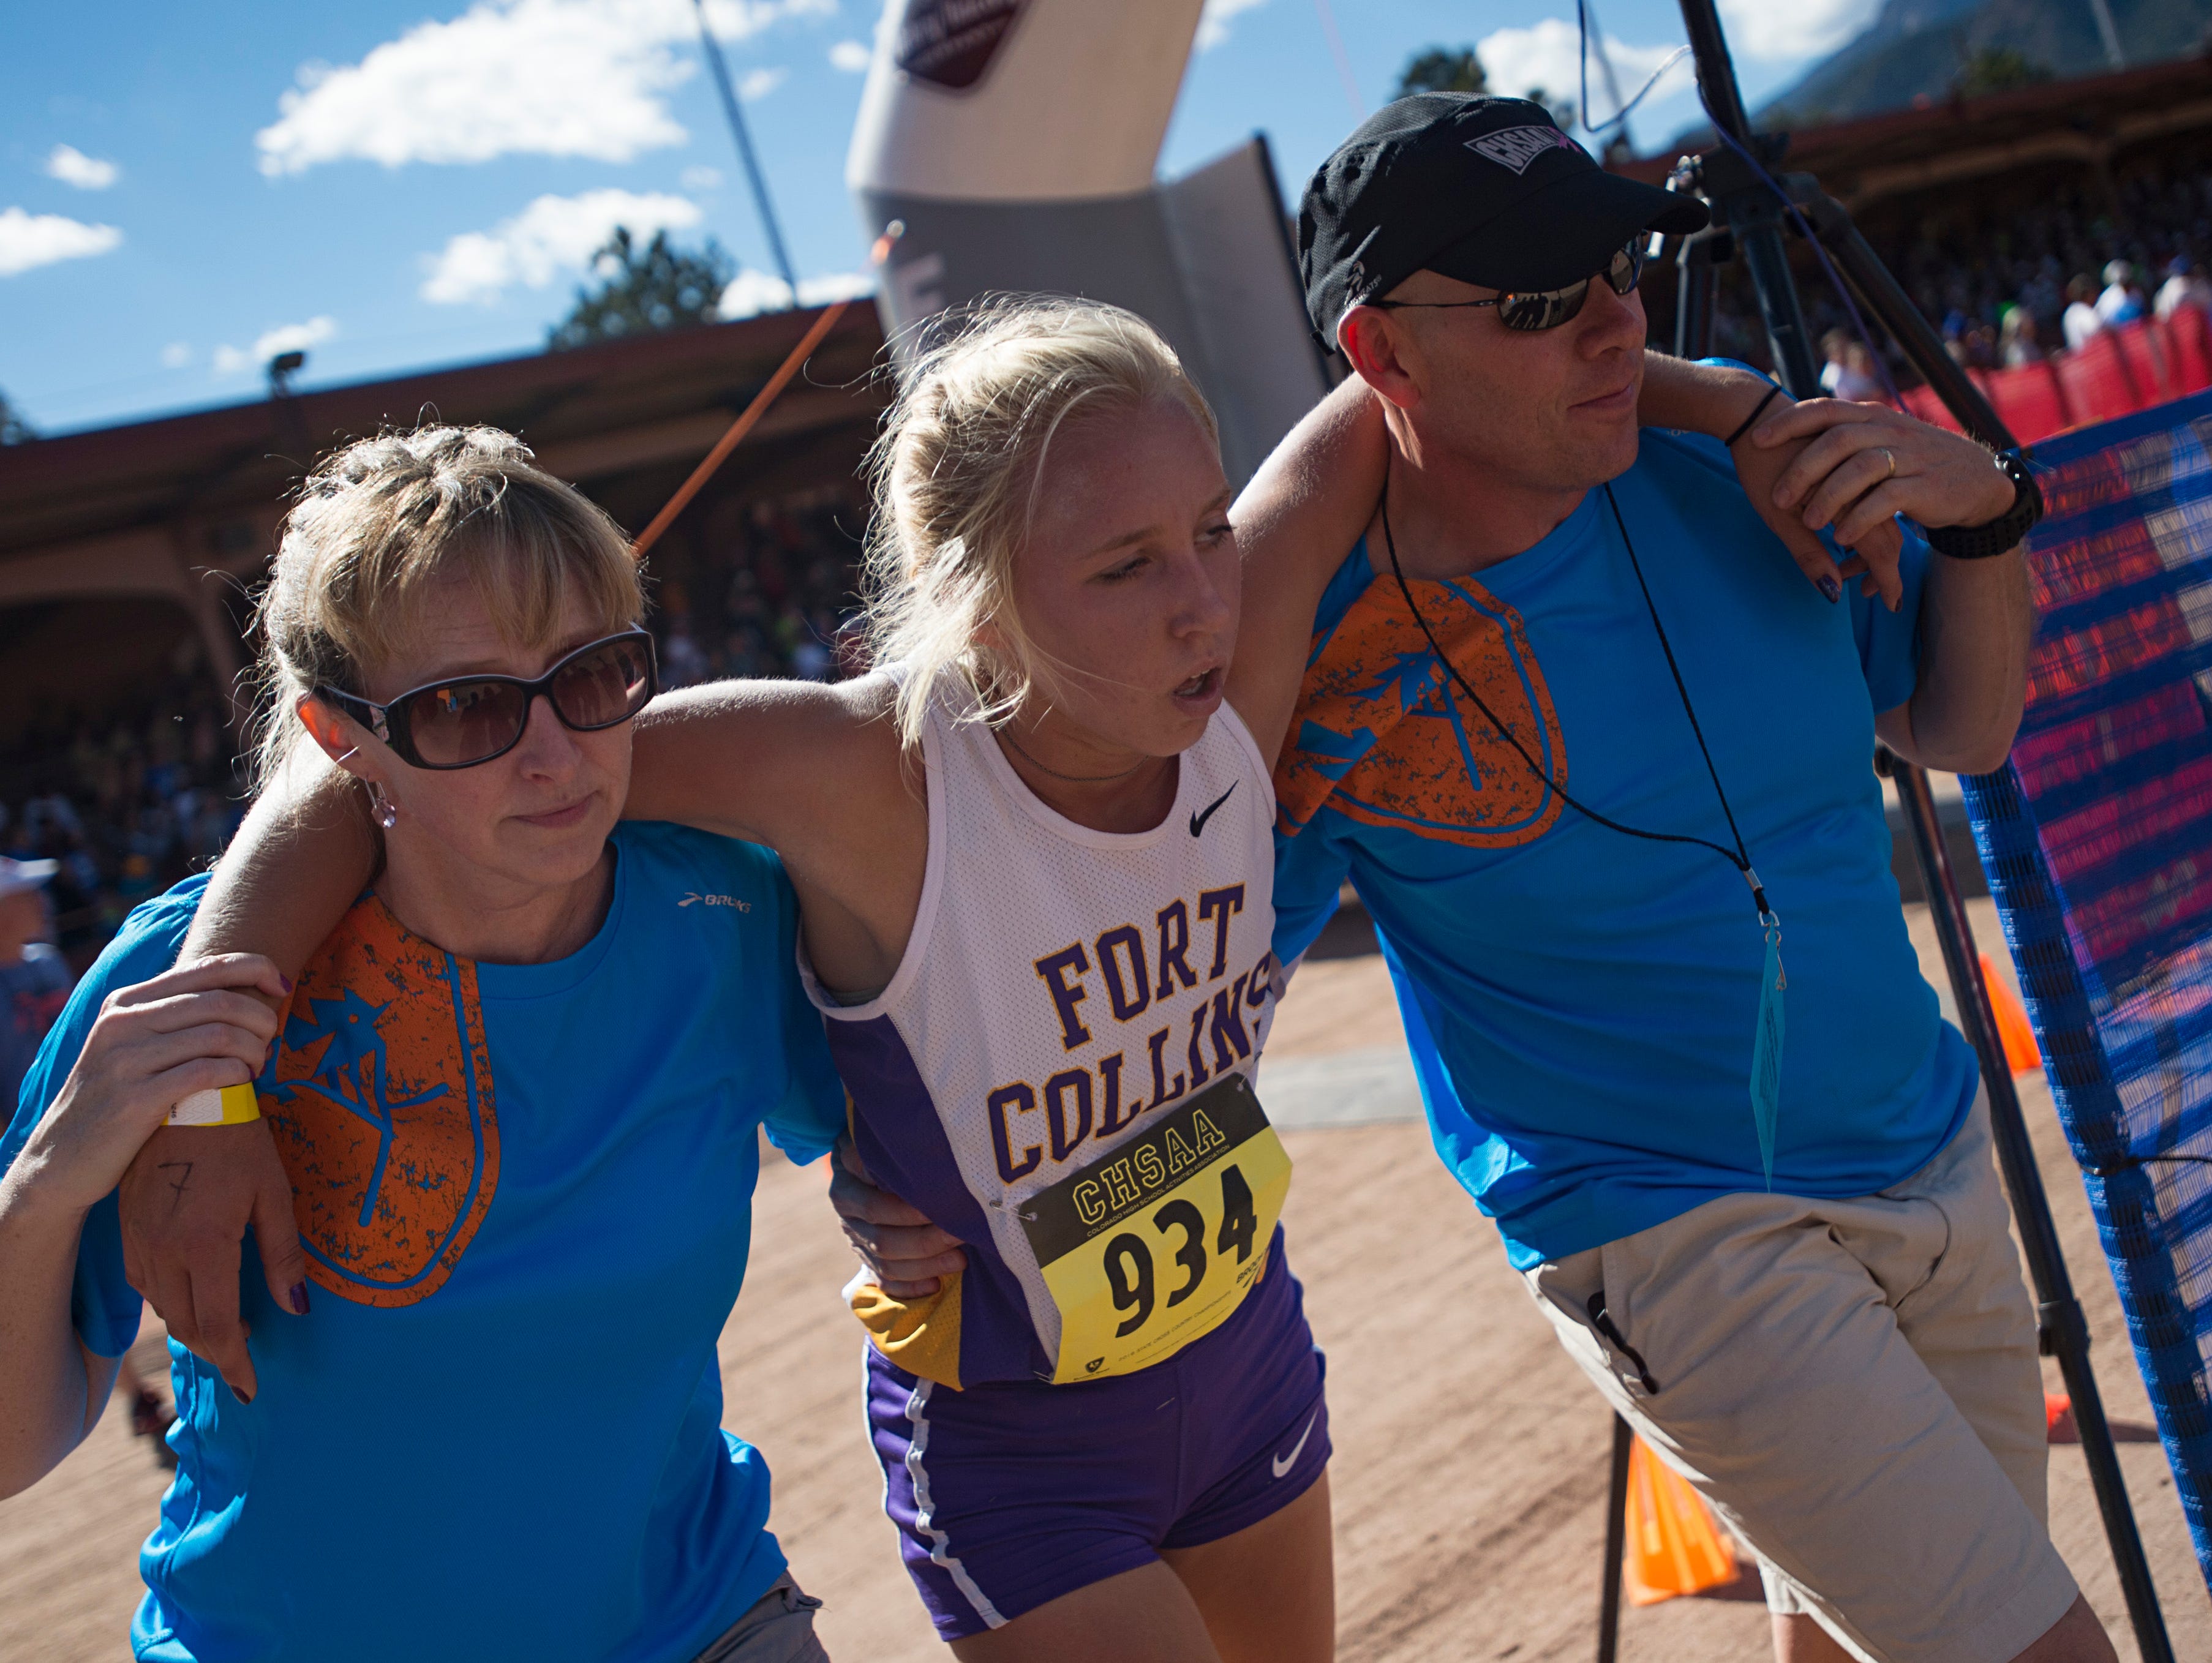 Fort Collins High School runner and defending champion Lauren Gregory is helped by officials after crossing the finish line in the CHSAA Cross Country Championship at Norris-Penrose Events Center in Colorado Springs Saturday, October 29, 2016. Gregory finished second.